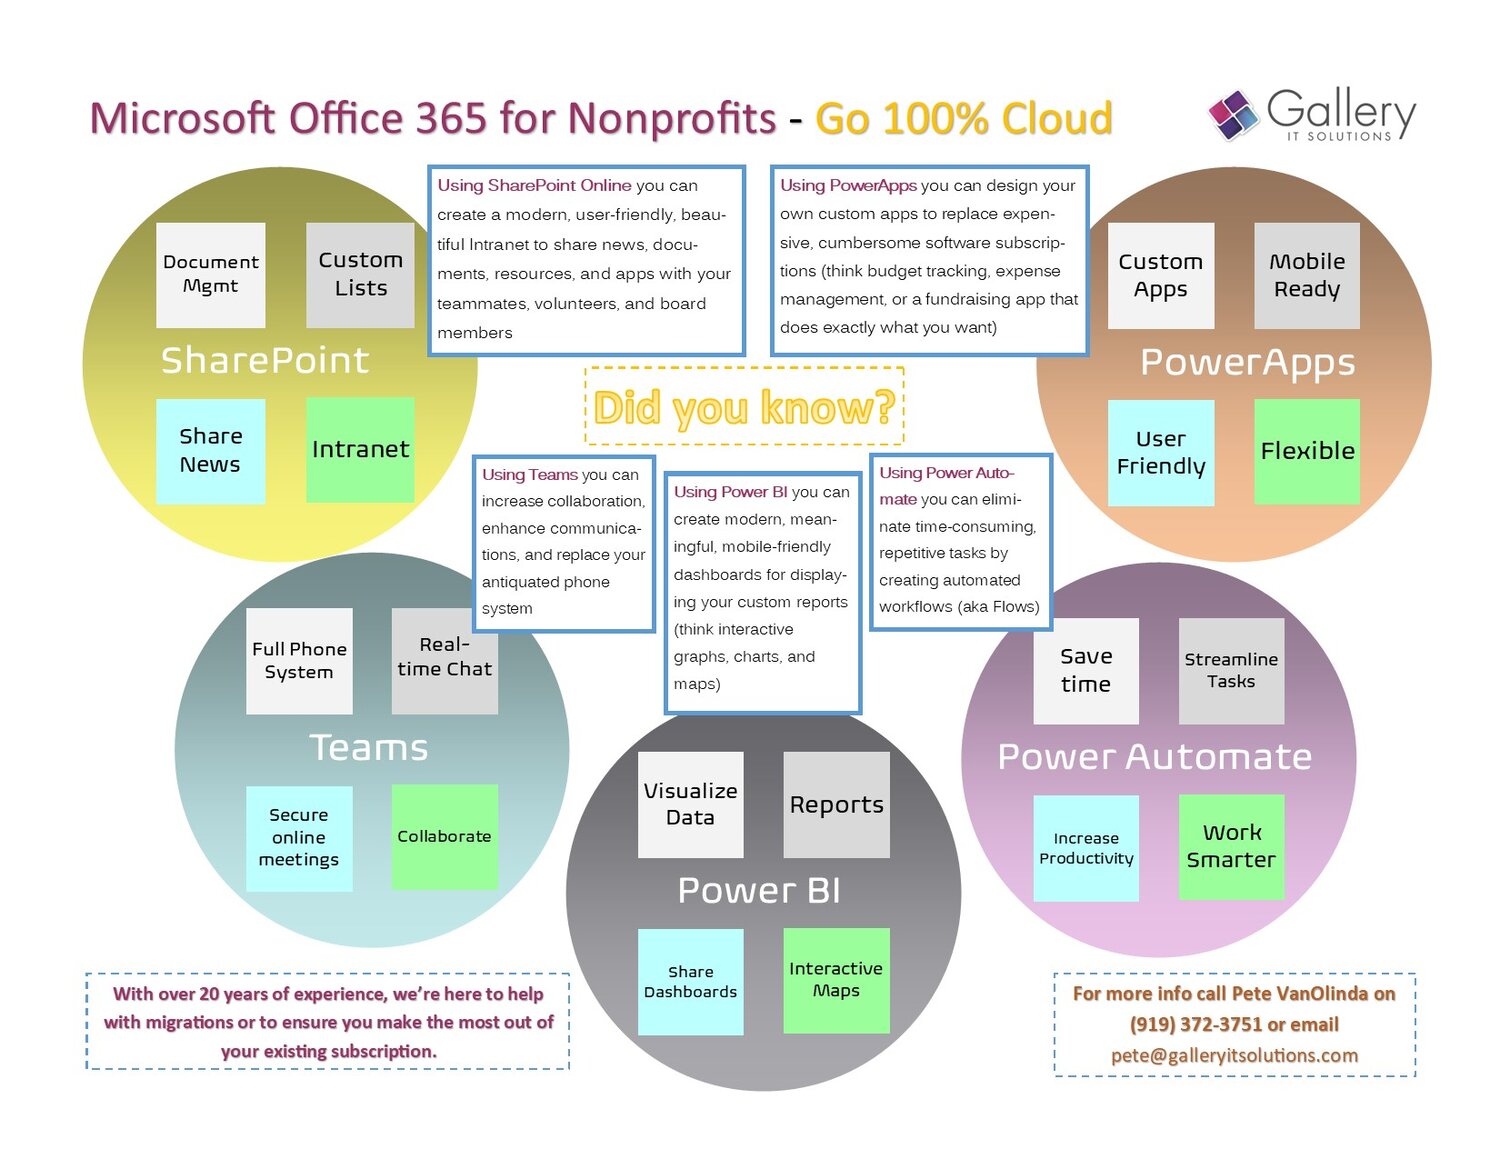 Microsoft Office 365 for nonprofits infographic